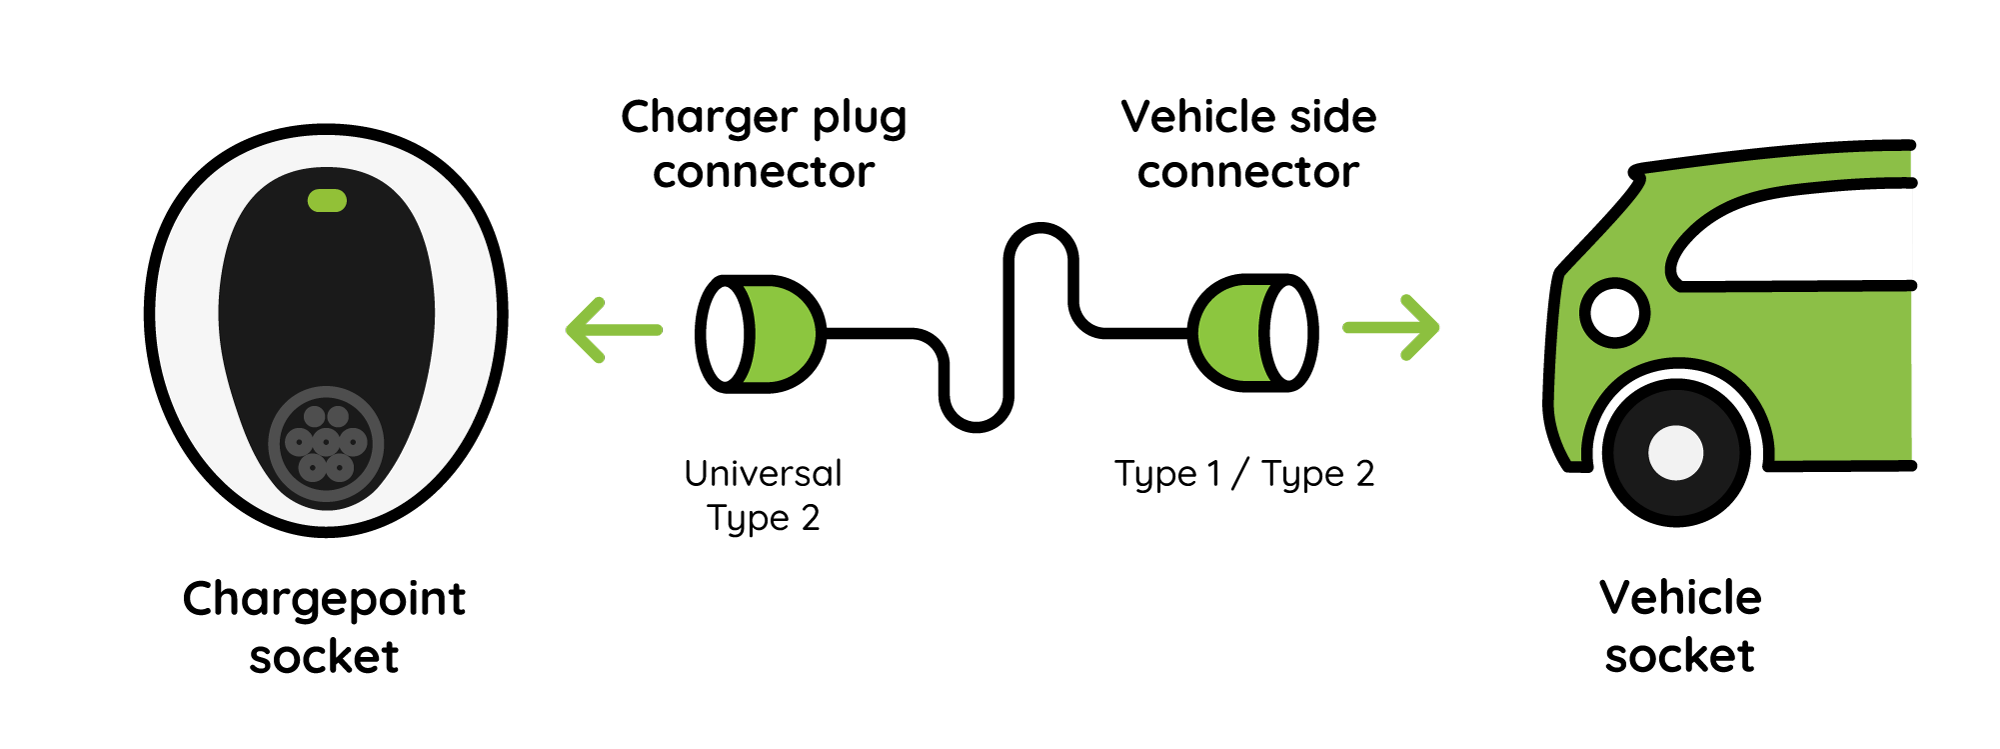 EV connector types: (a) Type 2, (b) CCS combo 2, and (c) Type 4